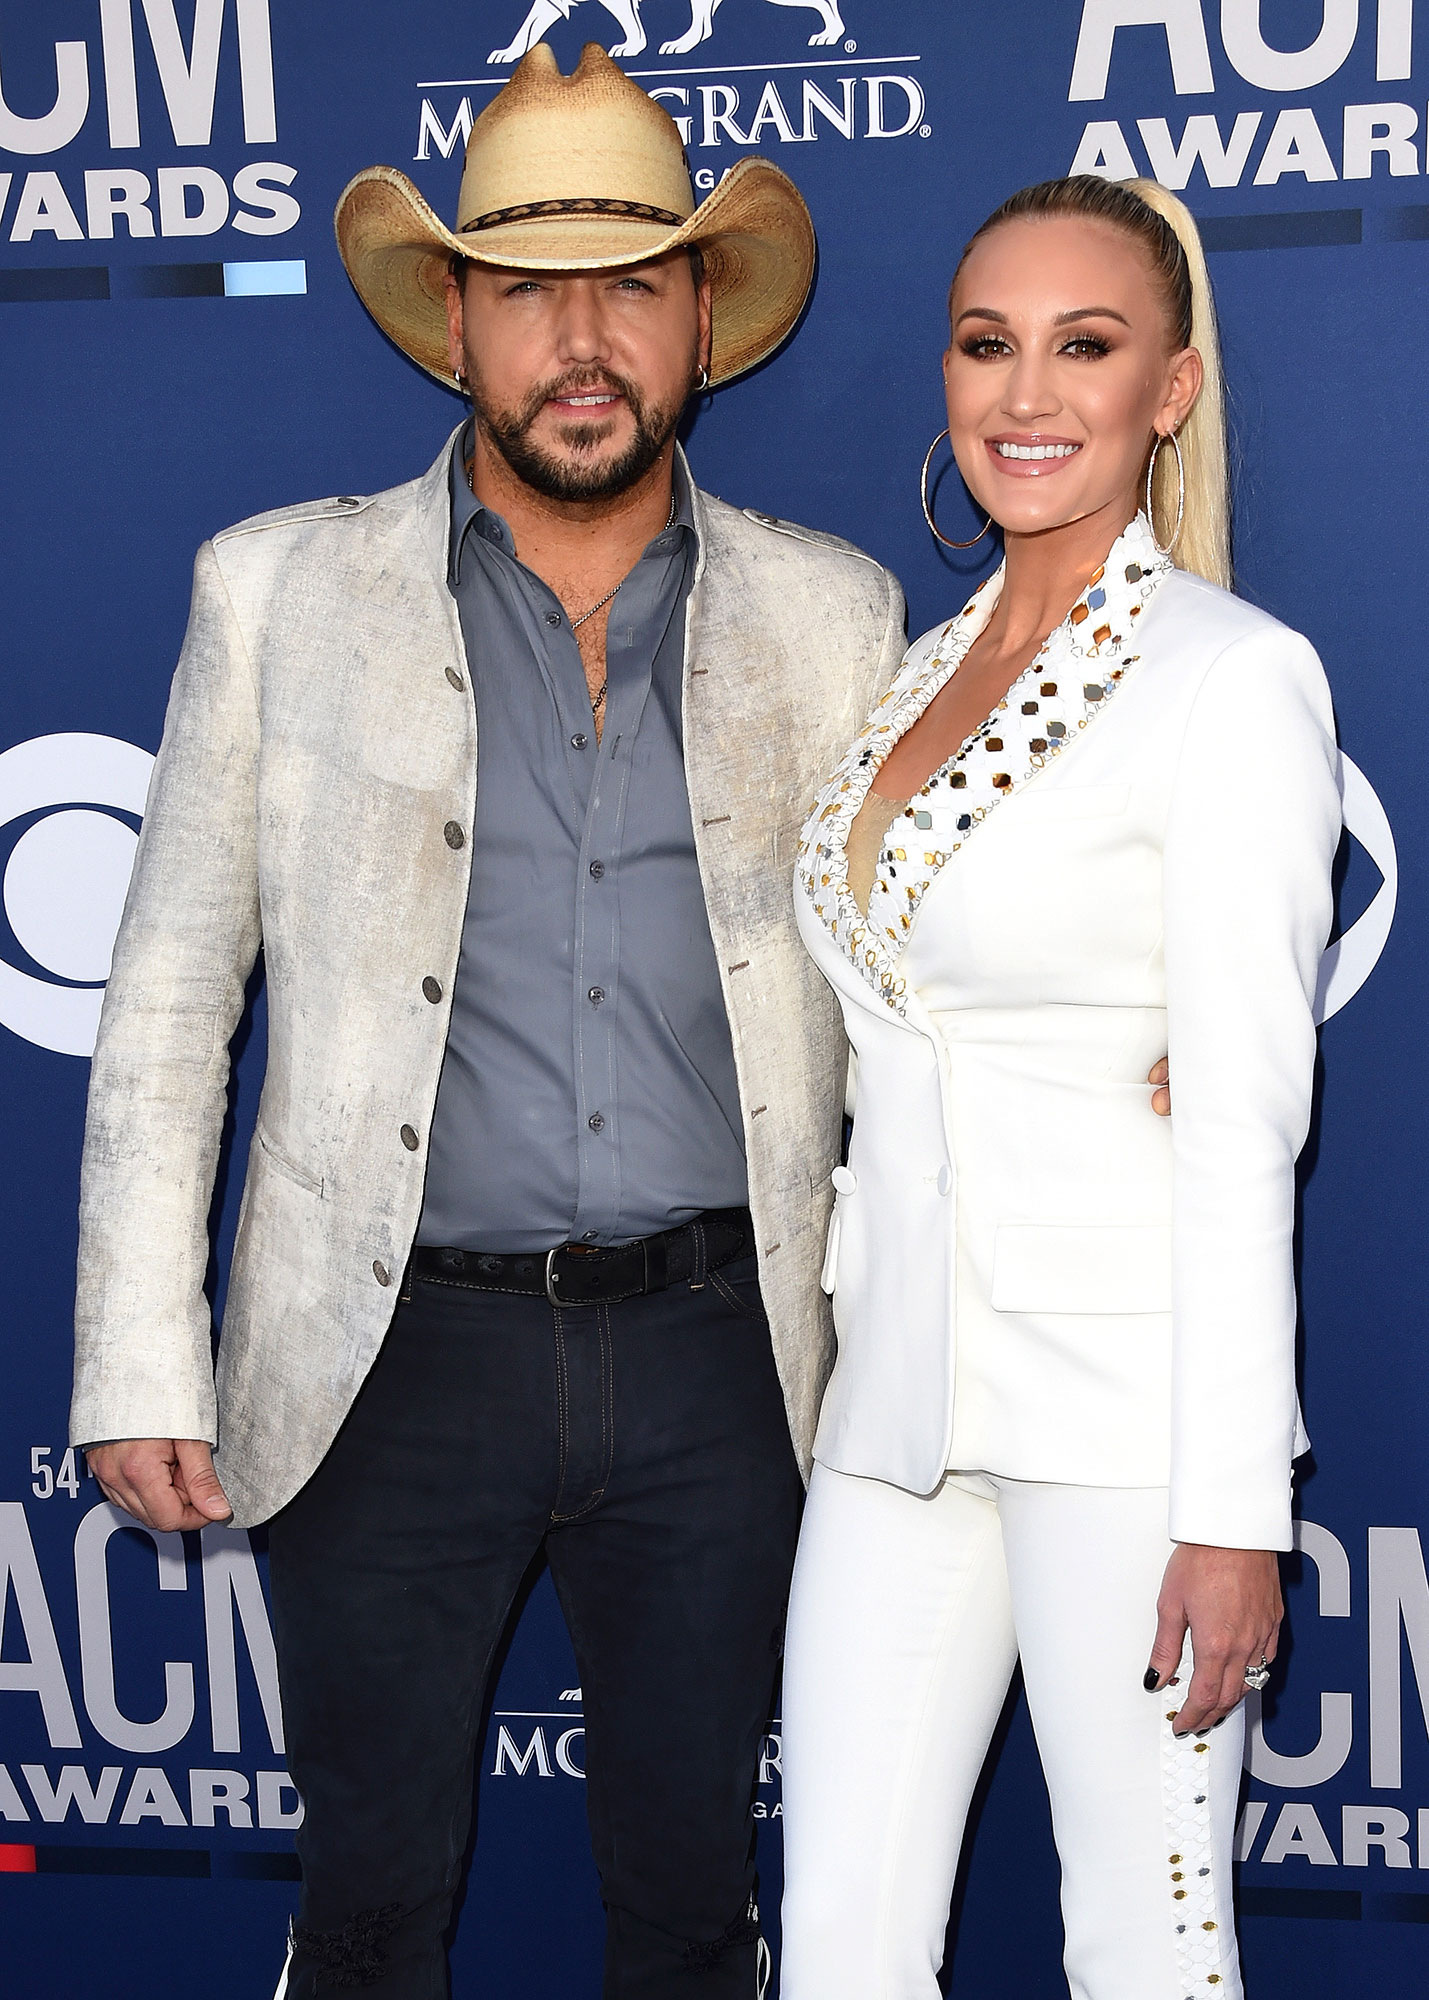 https://www.usmagazine.com/wp-content/uploads/2019/11/Jason-Aldean-and-Brittany-Kerr-Country-Music-Couples.jpg?quality=40&strip=all